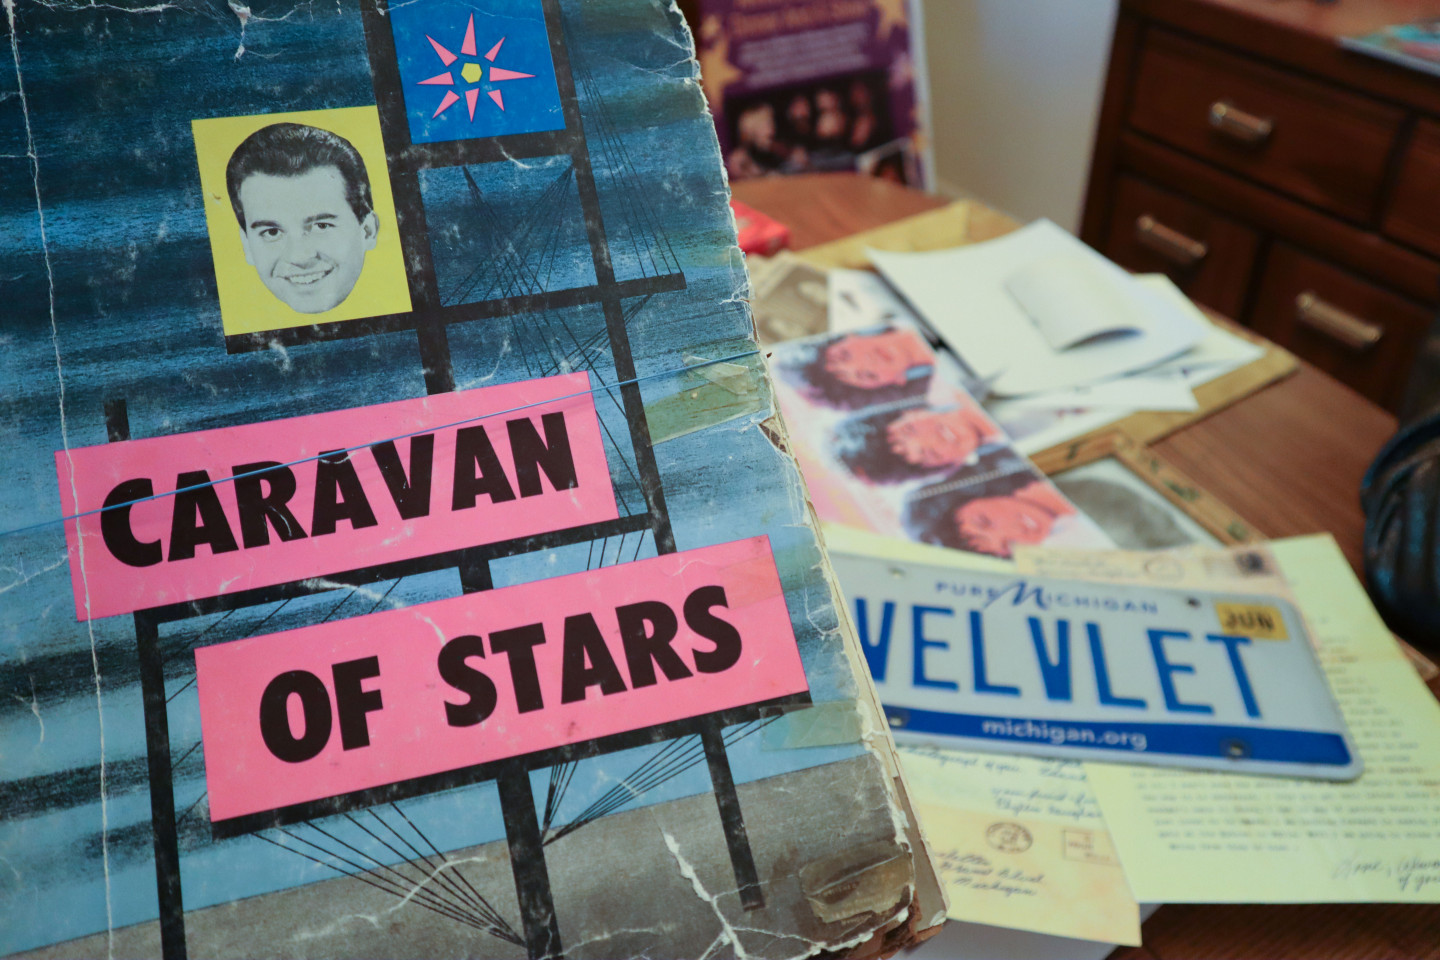 A program from the "Caravan of Stars" tour.